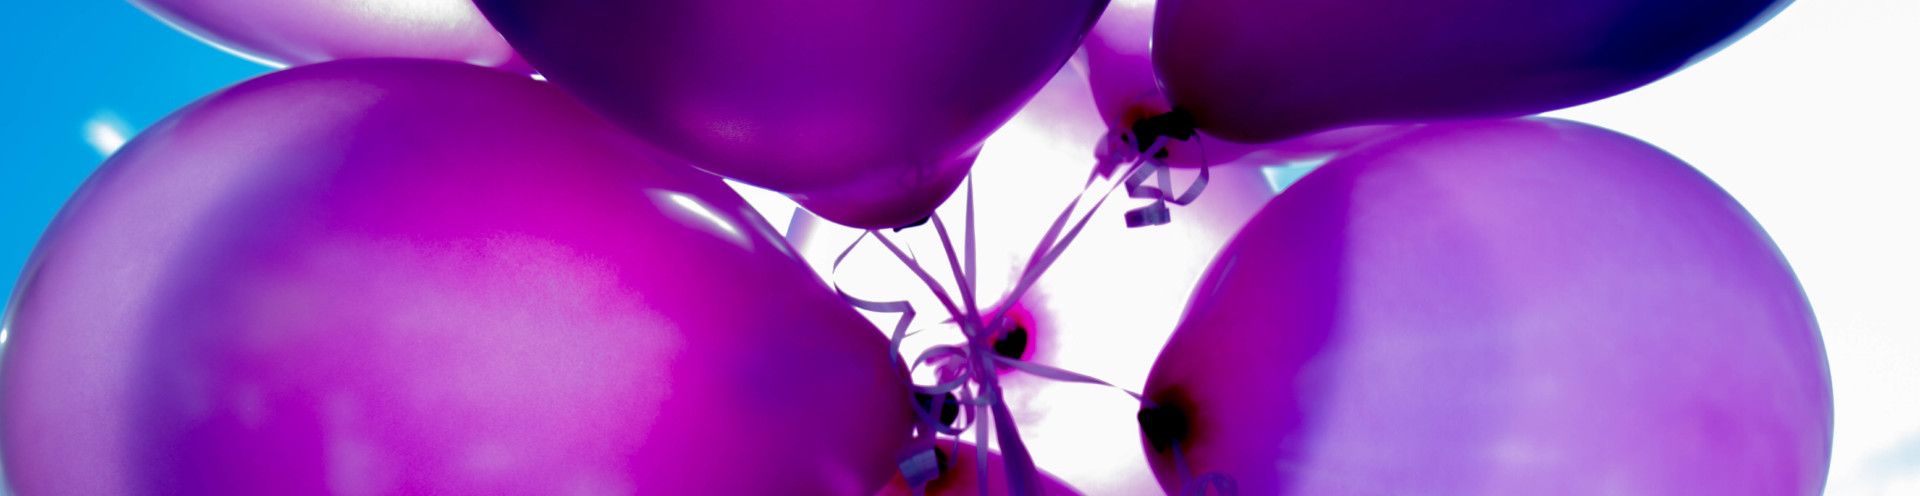 Purple balloons in a community party.